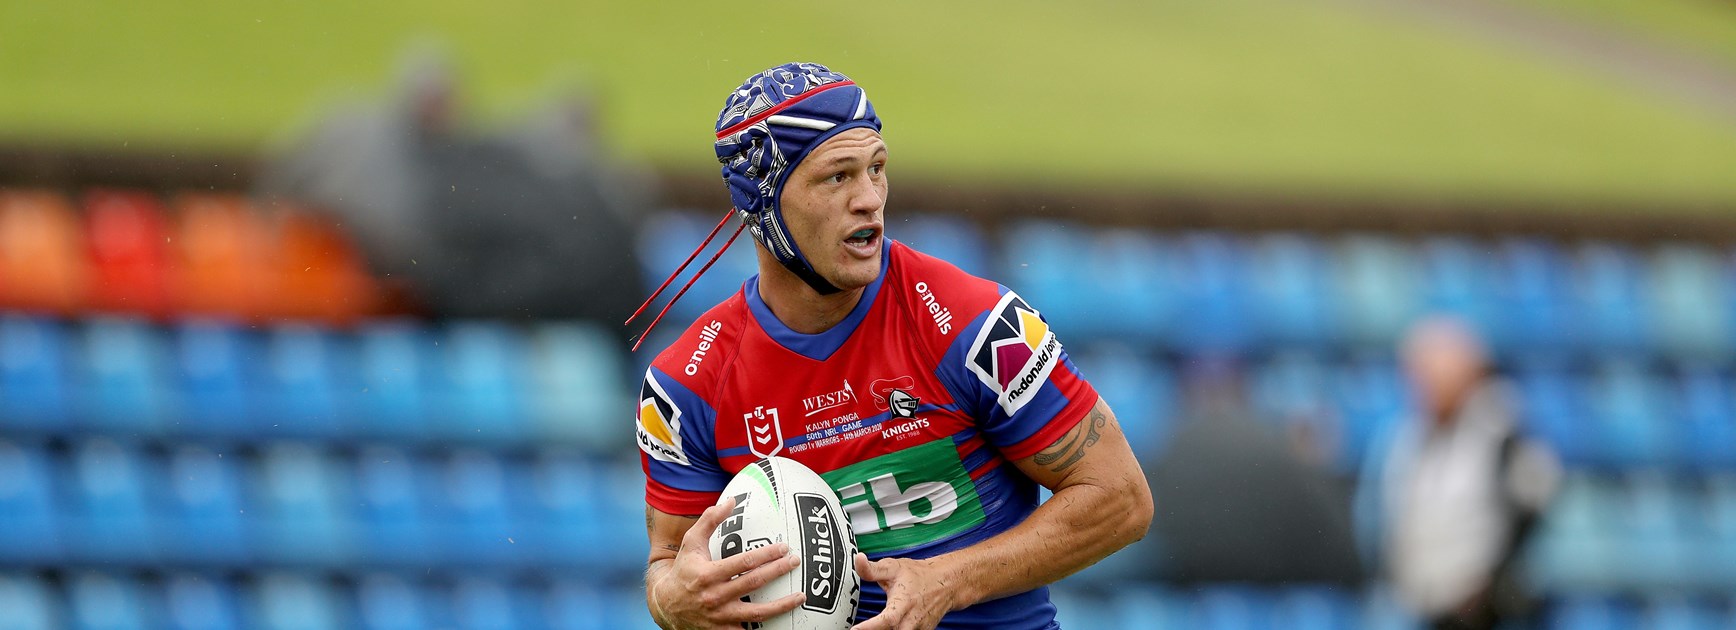 Fantasy: Ponga and D-Saf dominate in Rd 1 win